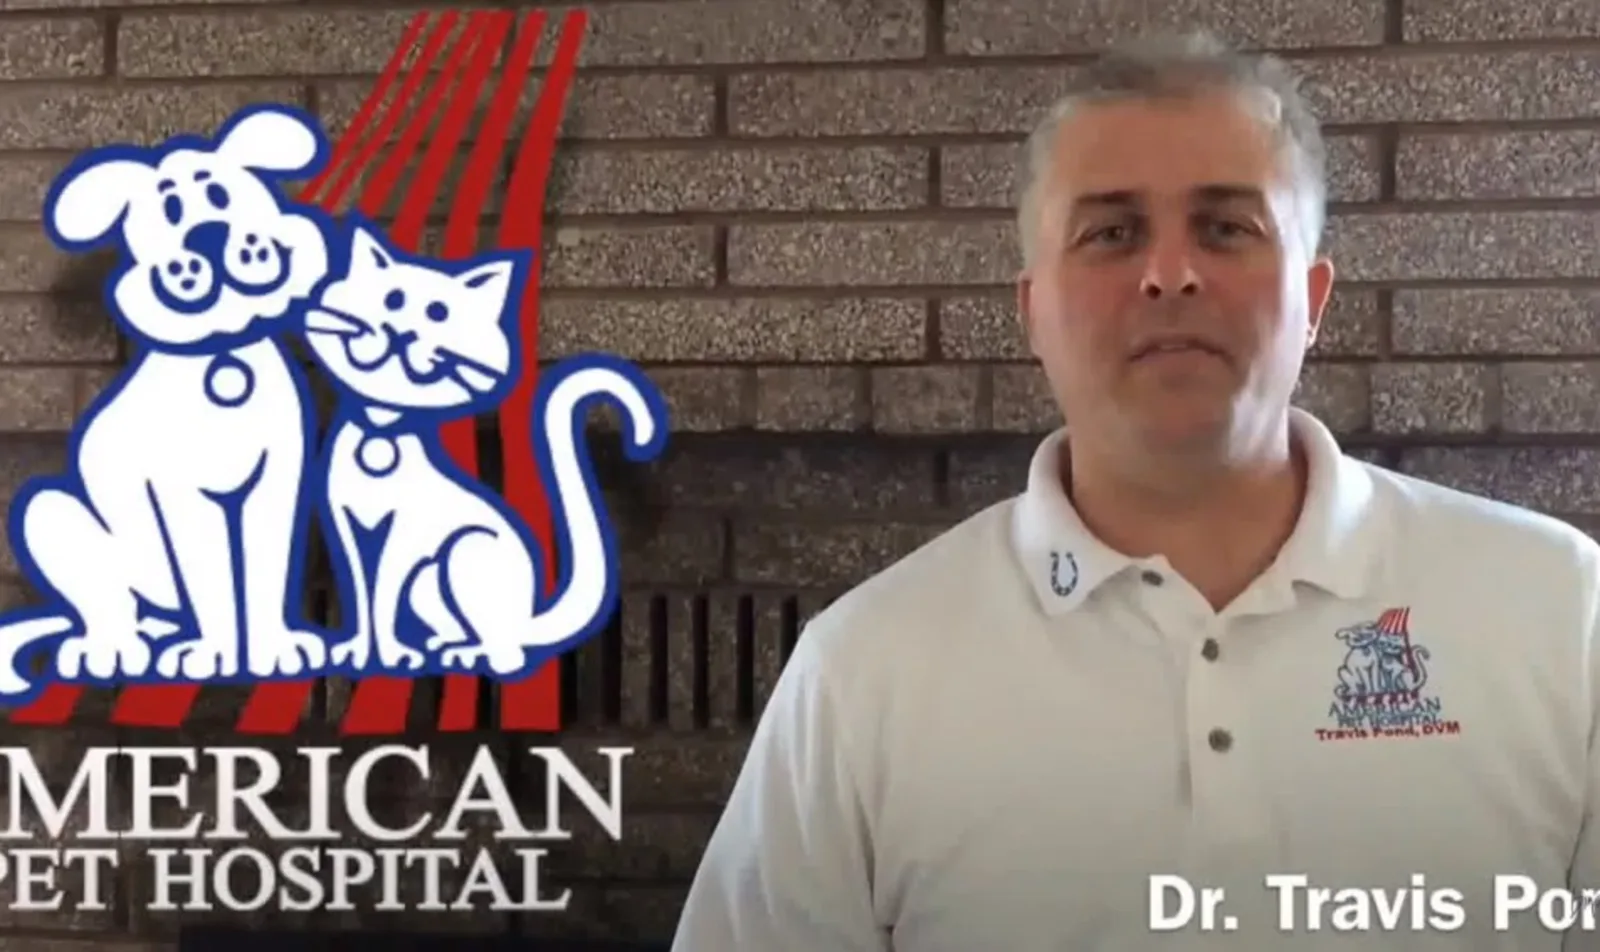 Dr. Travis Pond standing next to the American Pet Hospital logo